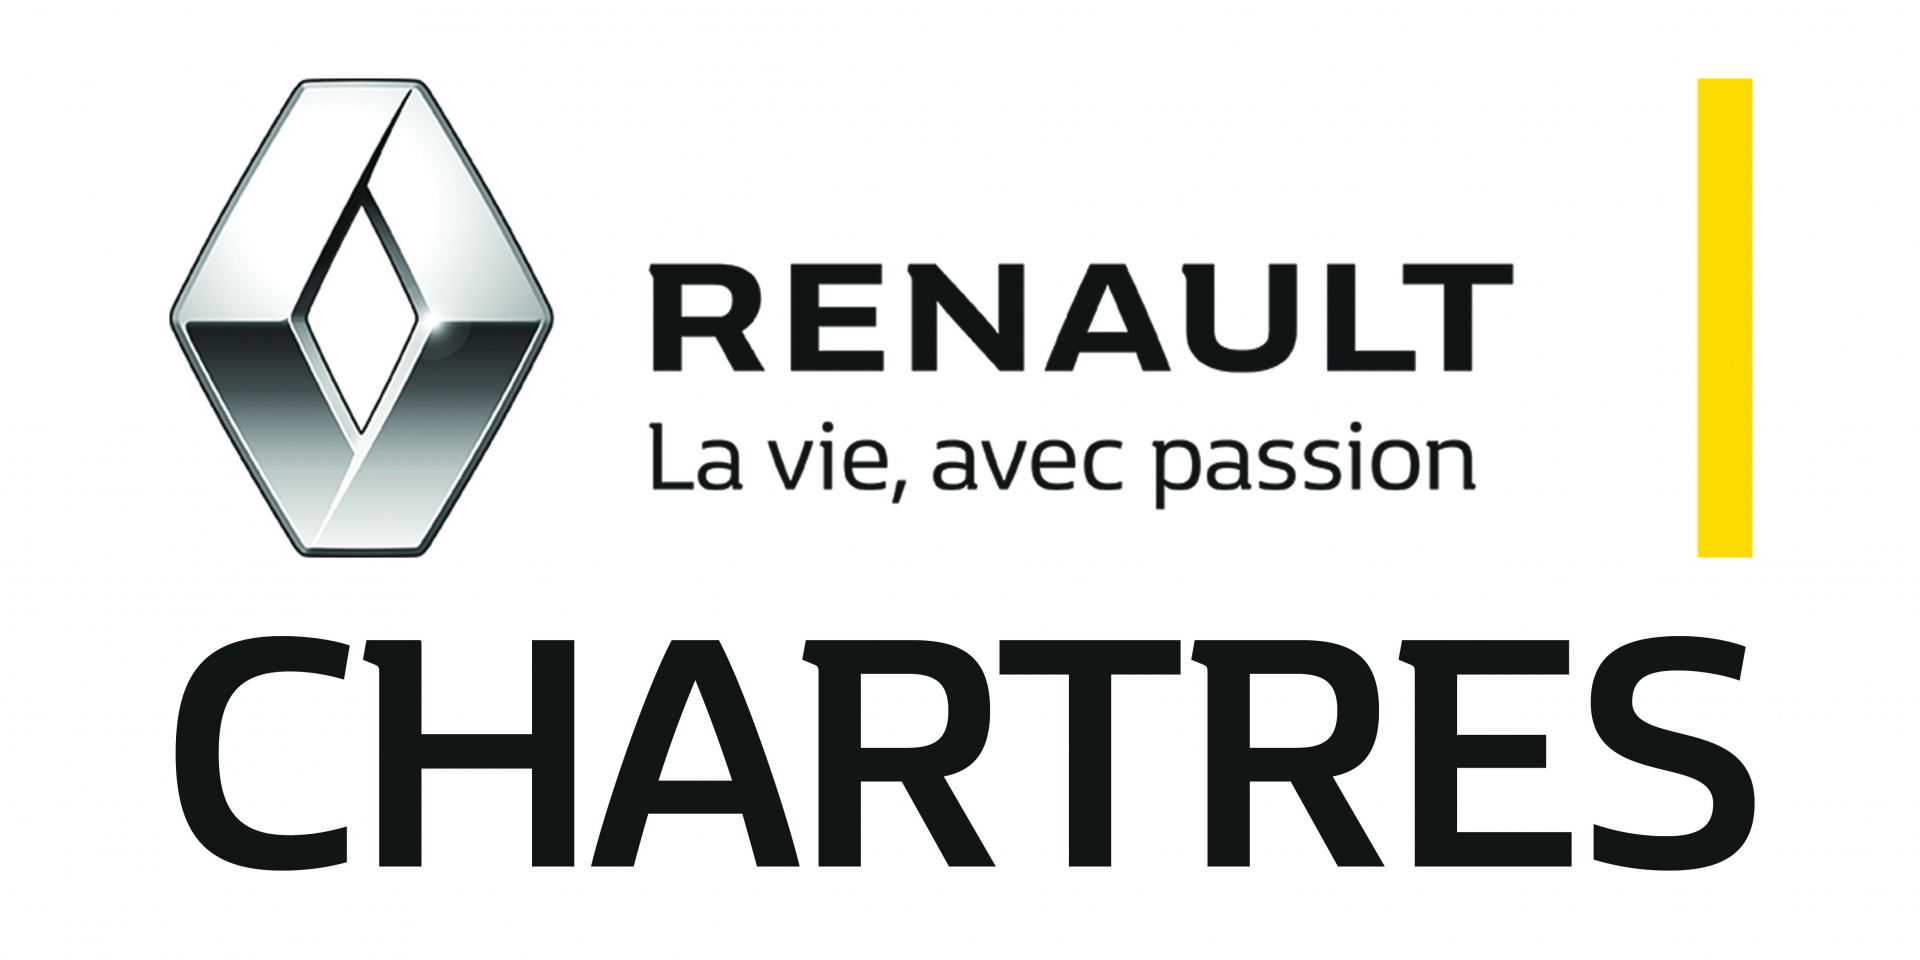 RENAULT CHARTRES